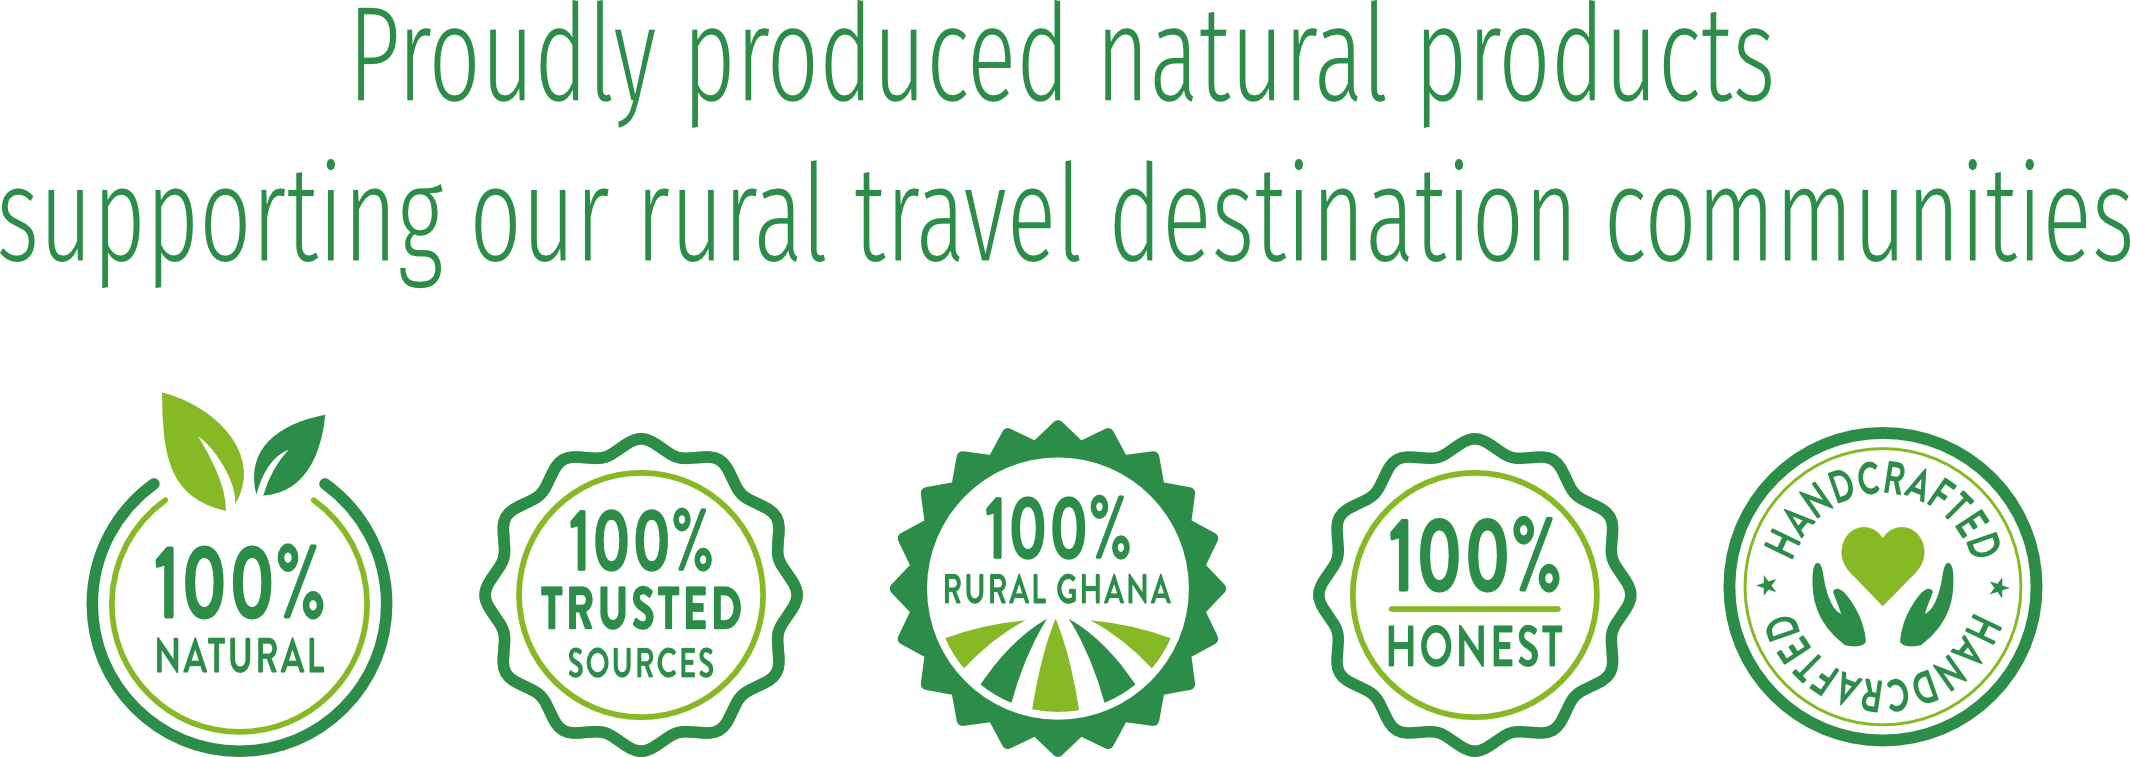 Proudly produced natural products supporting our rural travel destination communities